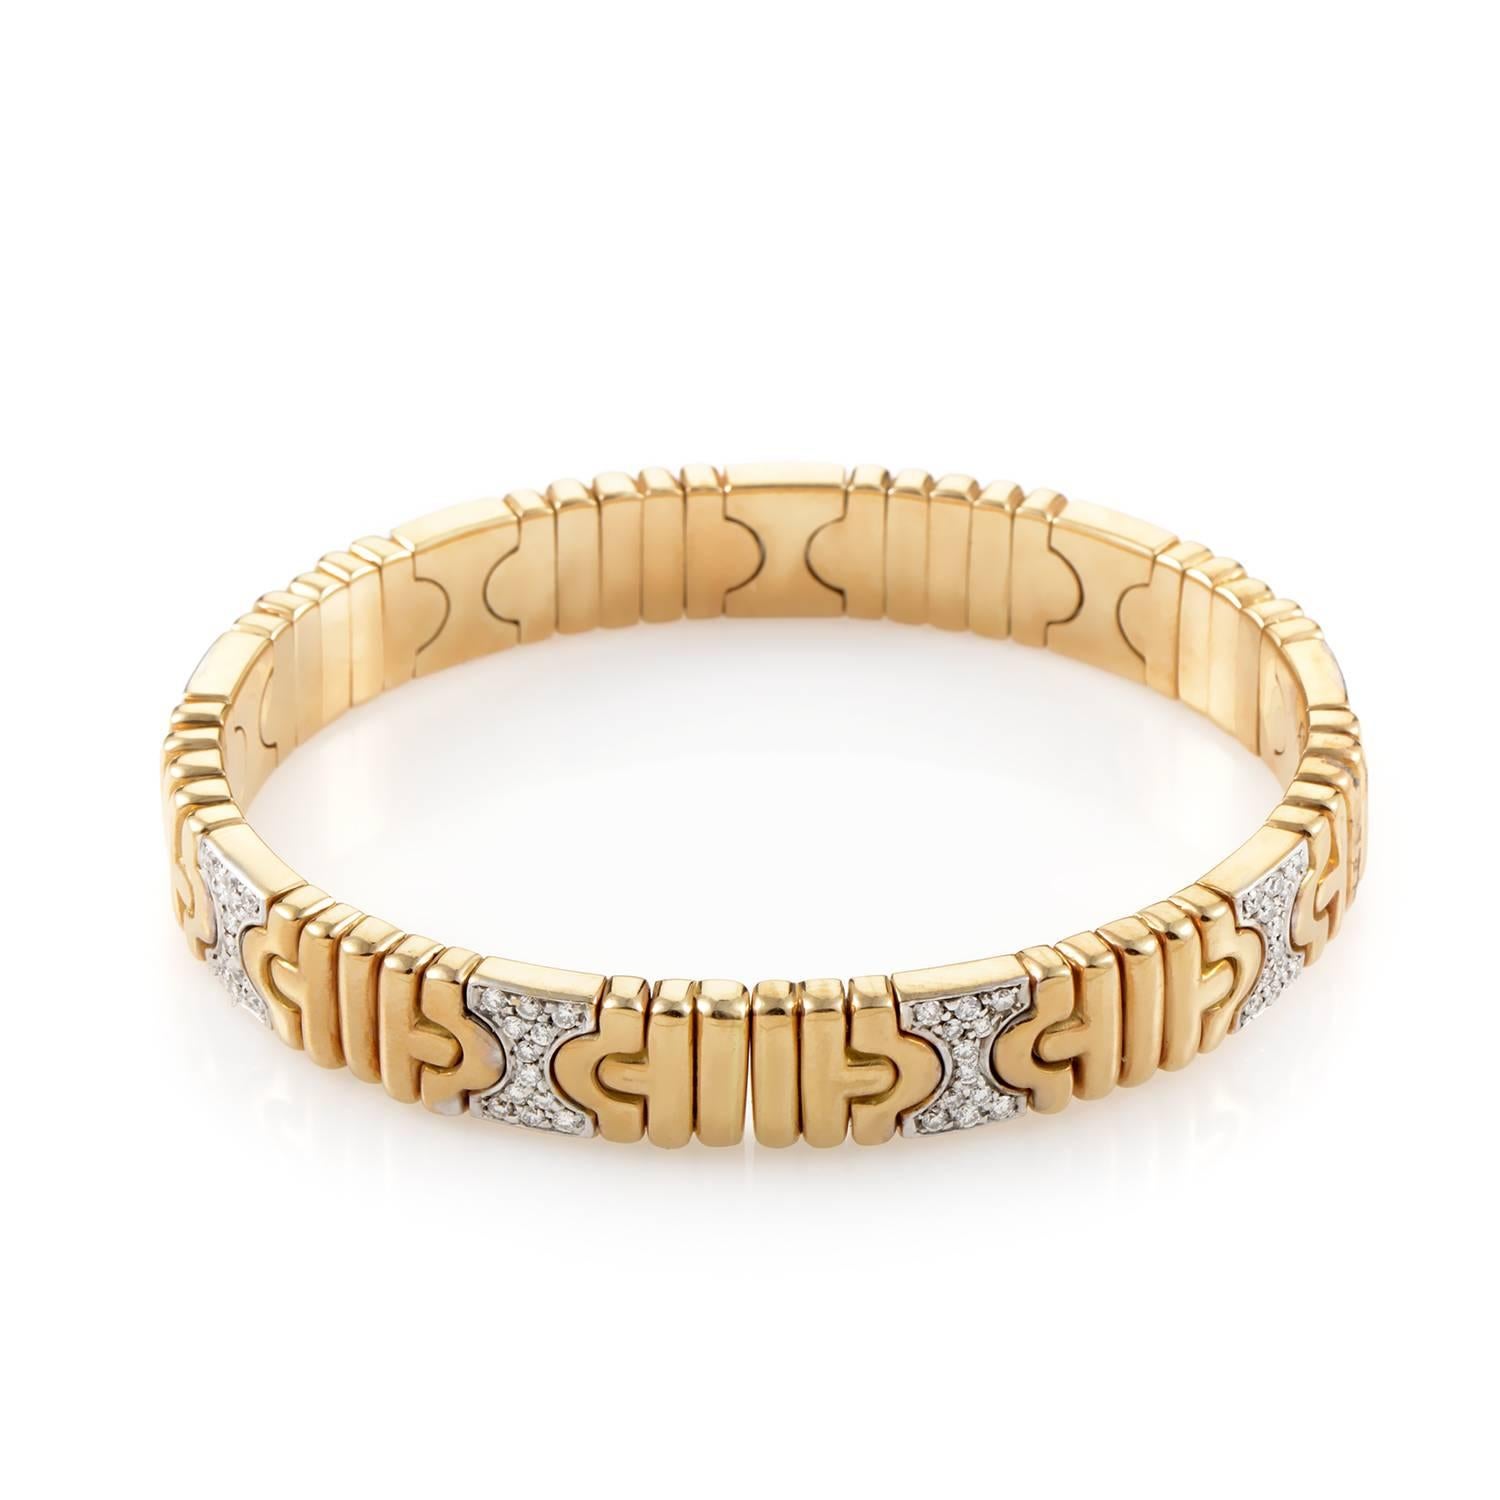 Embellished with the intriguing pattern which is a recurring theme in the brand's esteemed opus, this fantastic 18K yellow gold bangle from Bulgari also boasts 1.20 carats of glistening diamonds set upon several 18K white gold links for superb